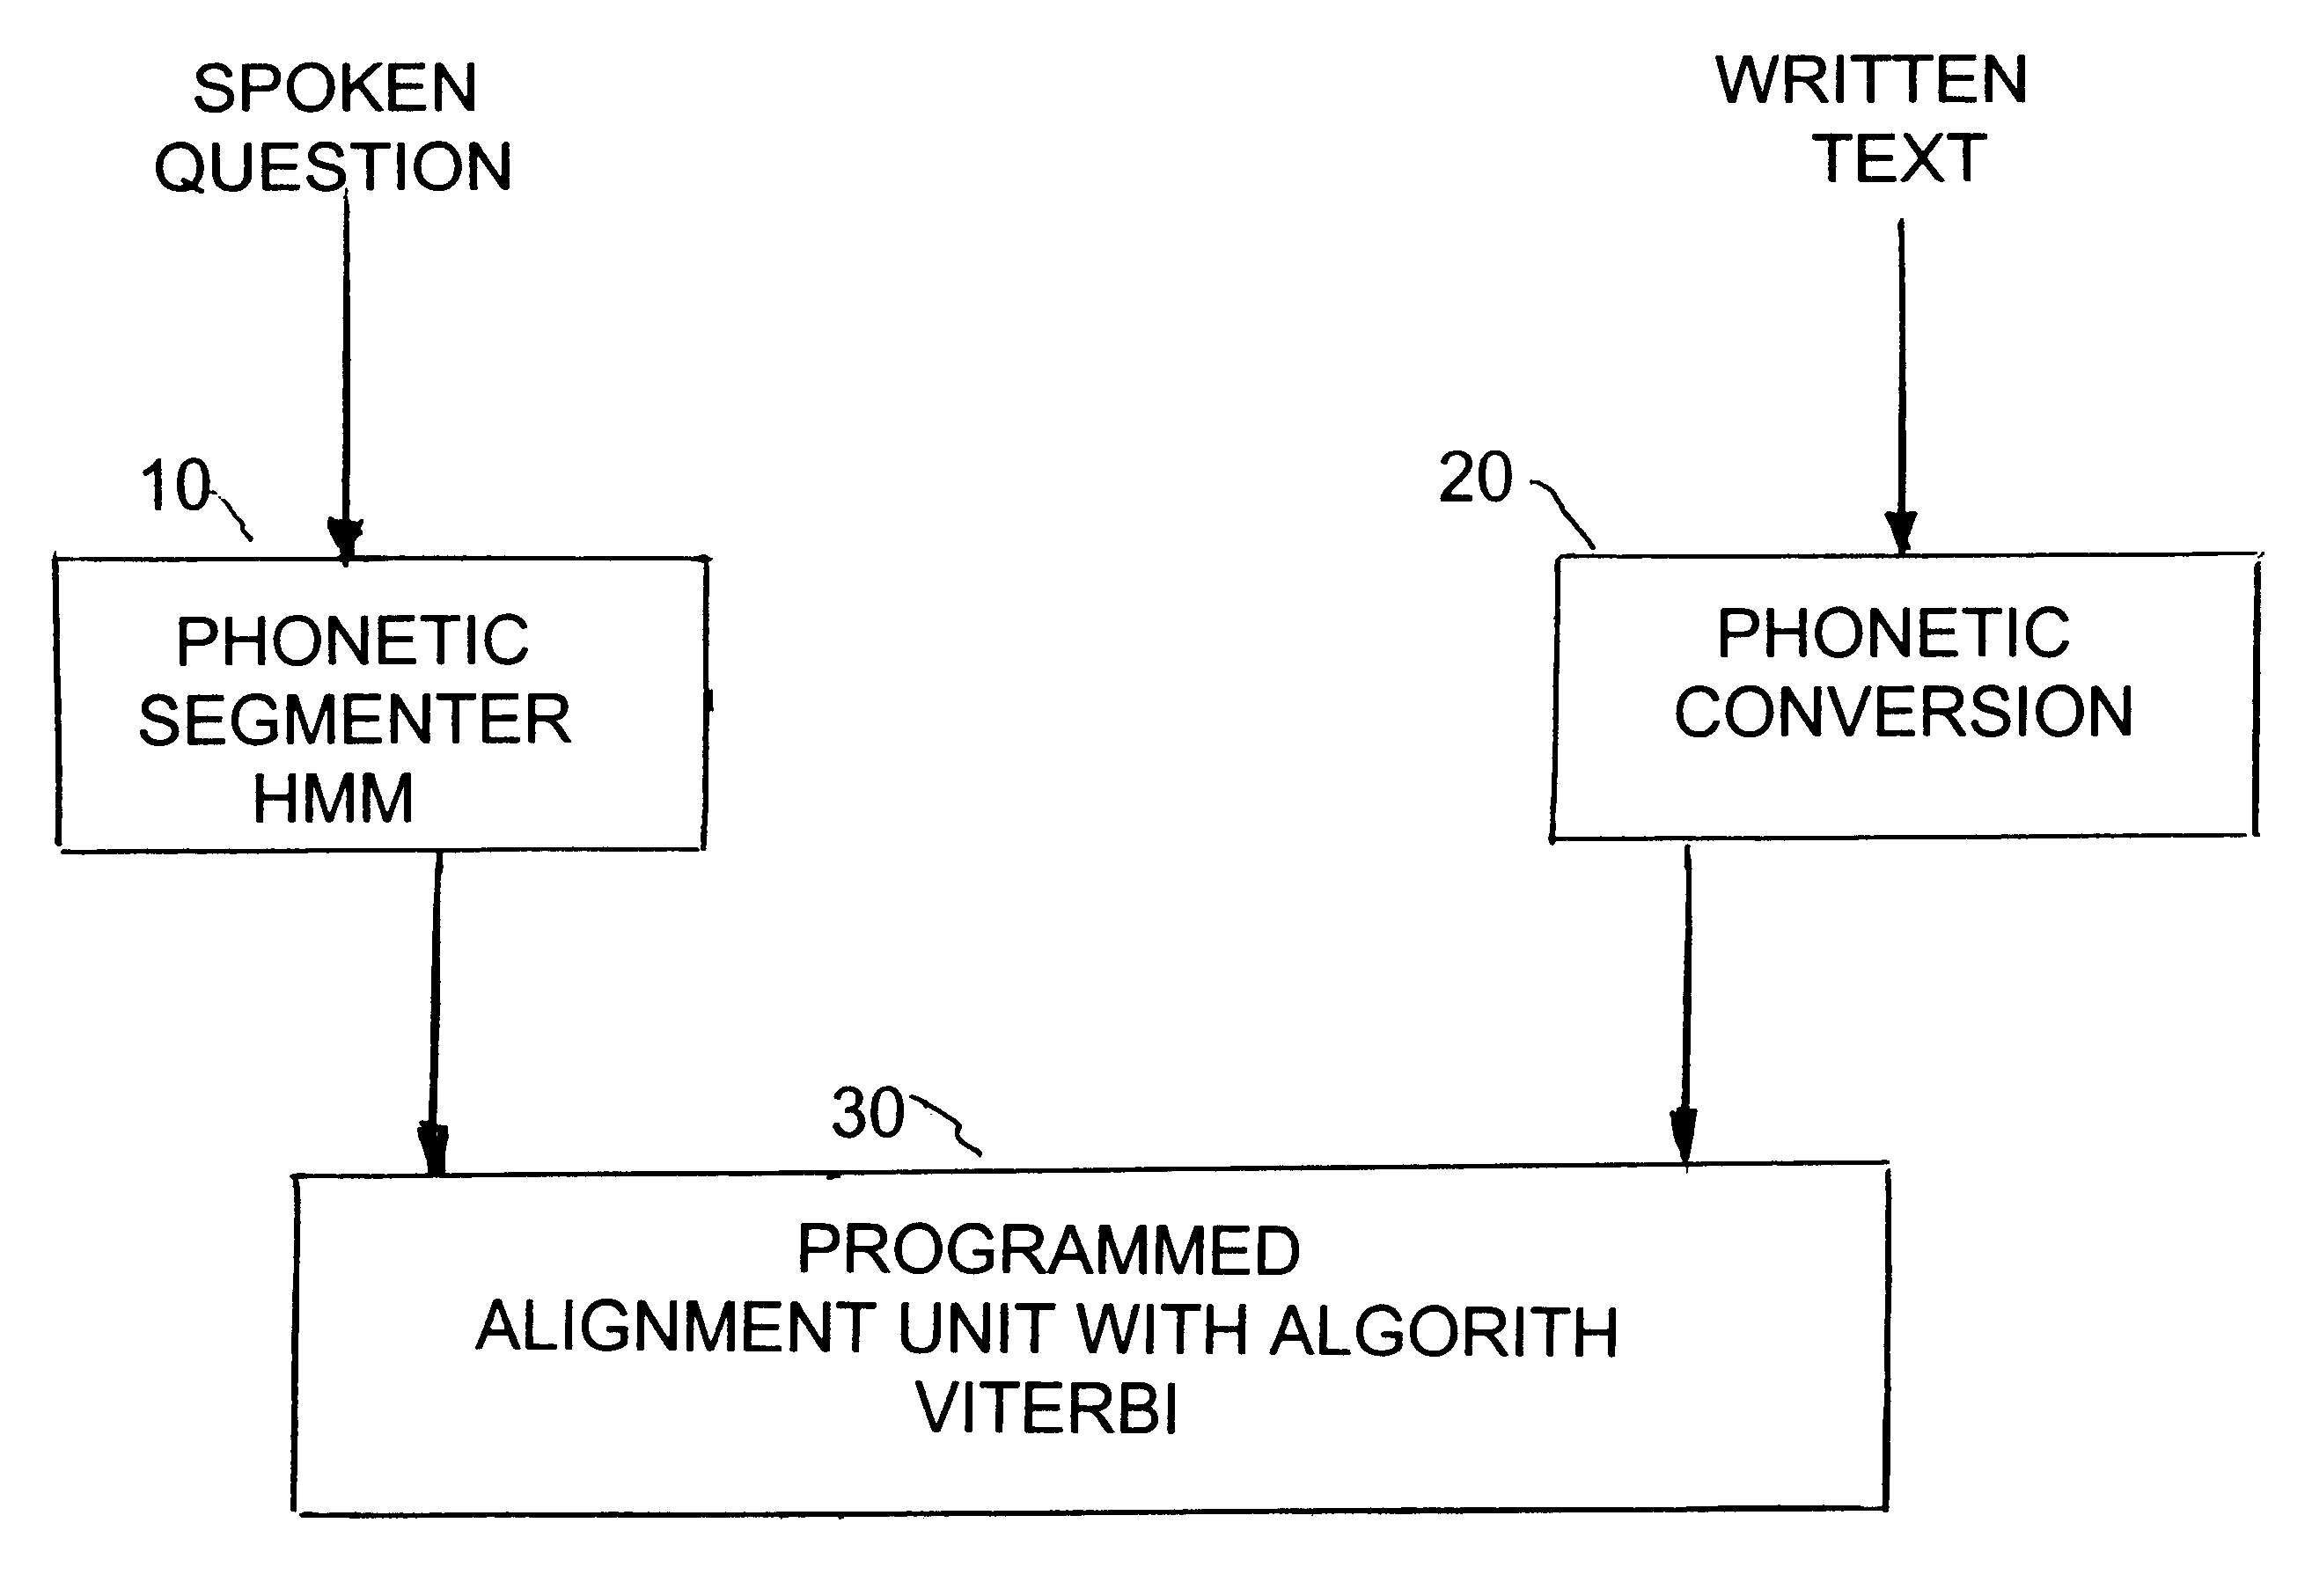 Process for searching for a spoken question by matching phonetic transcription to vocal request